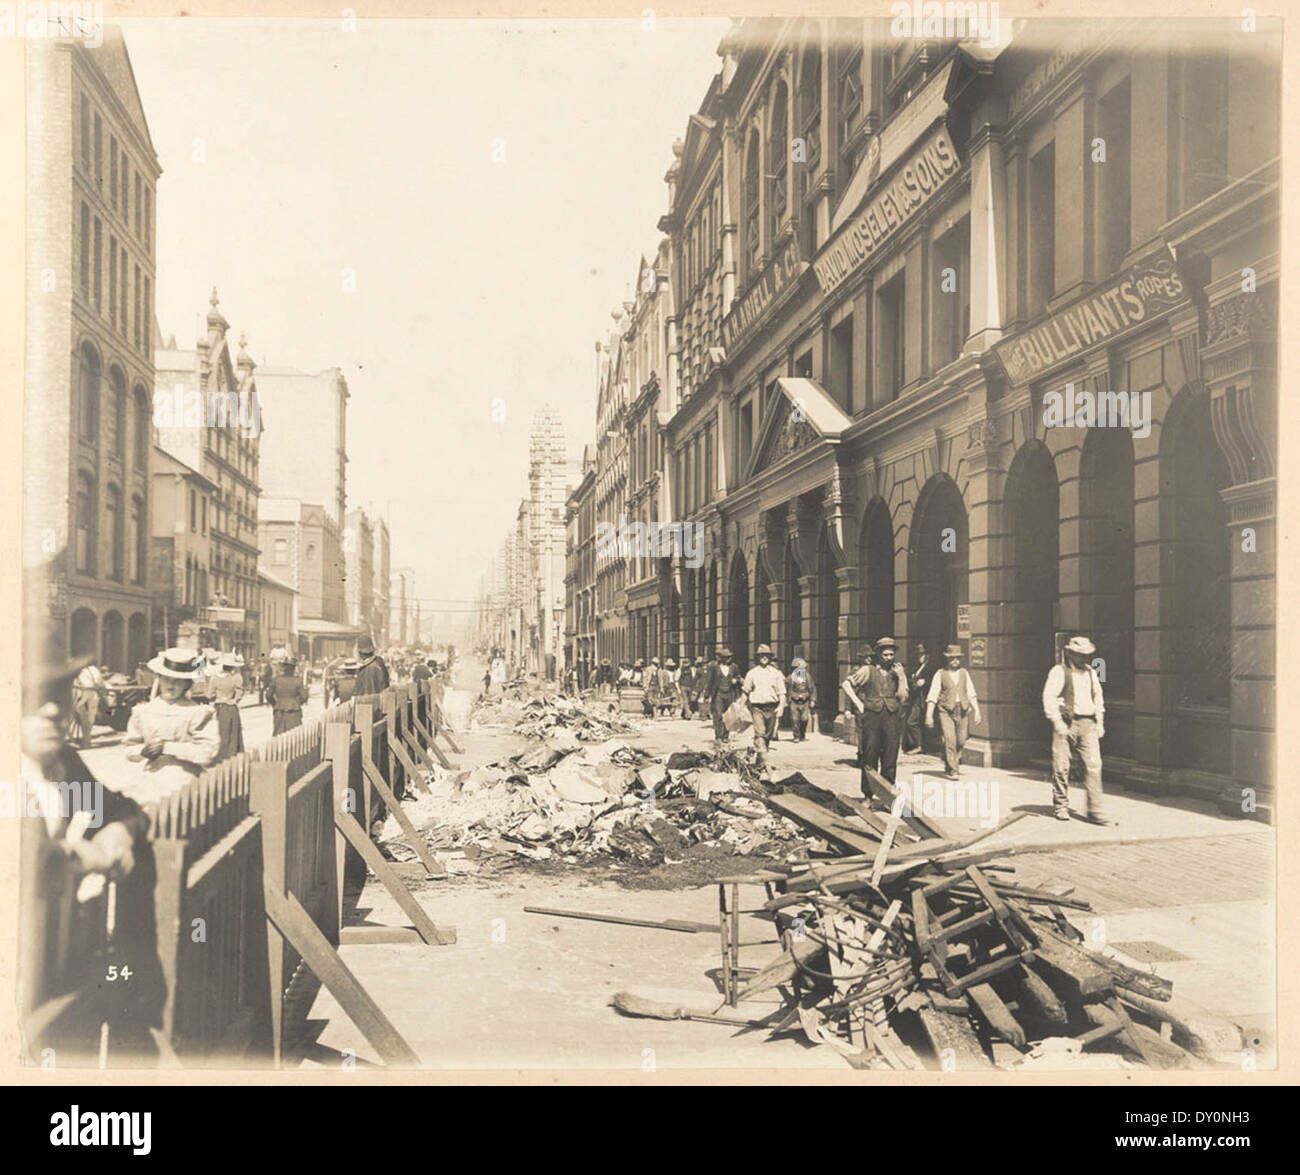 Kent-street from Views taken during Cleansing Operations, Quarantine Area, Sydney, 1900, Vol. I / under the supervision of Mr George McCredie, F.I.A., N.S.W. photographed by John Degotardi Jr. Stock Photo